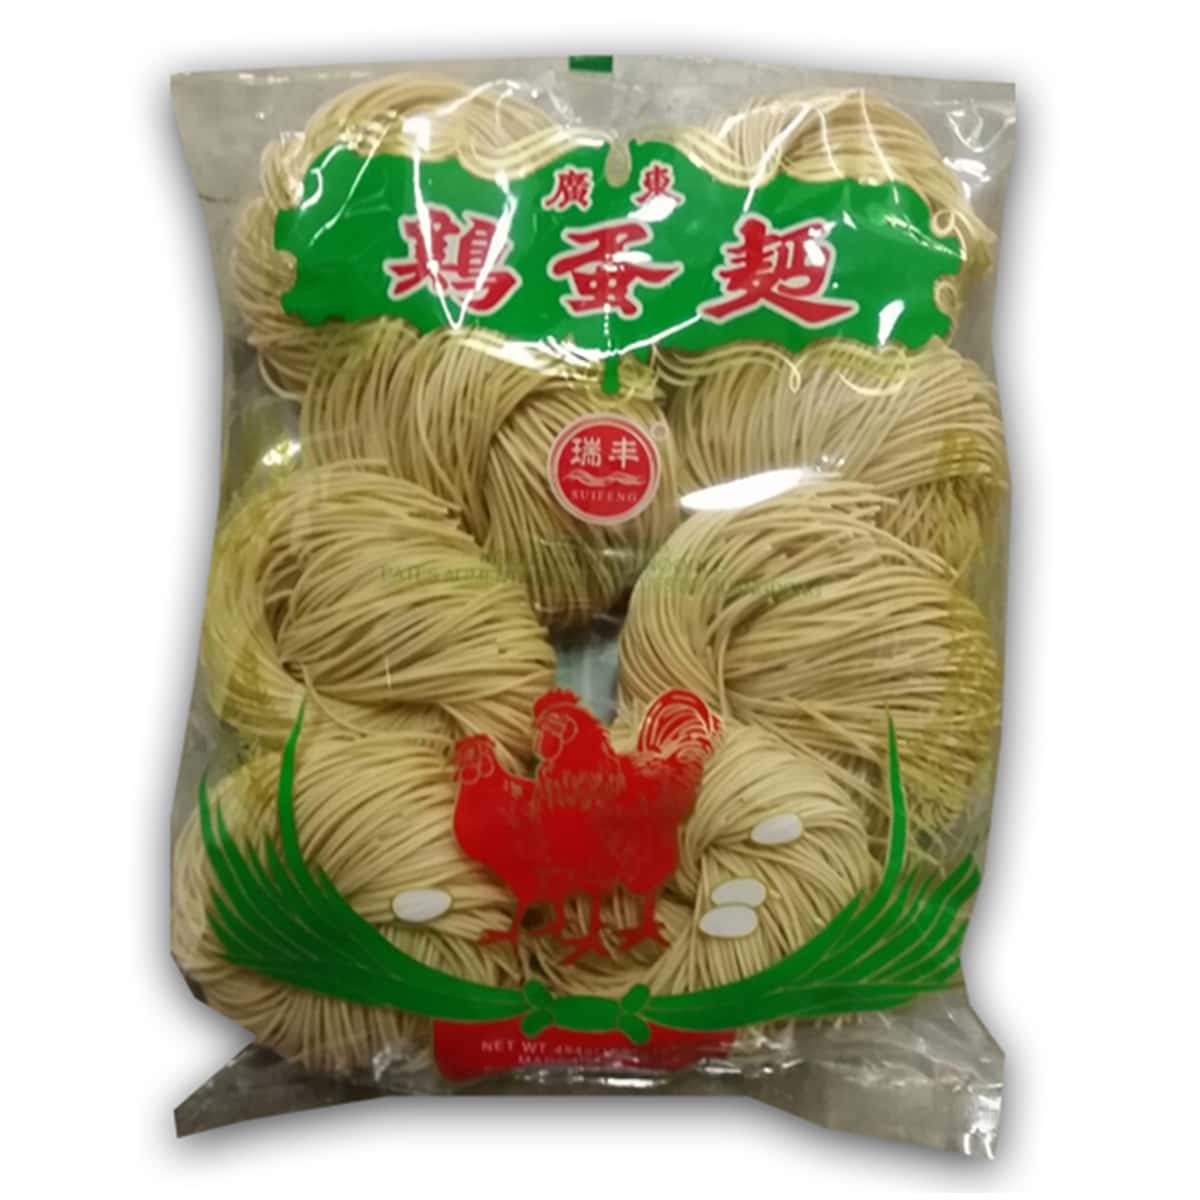 Buy SUI FENG Dried Egg Noodle - 464 gm